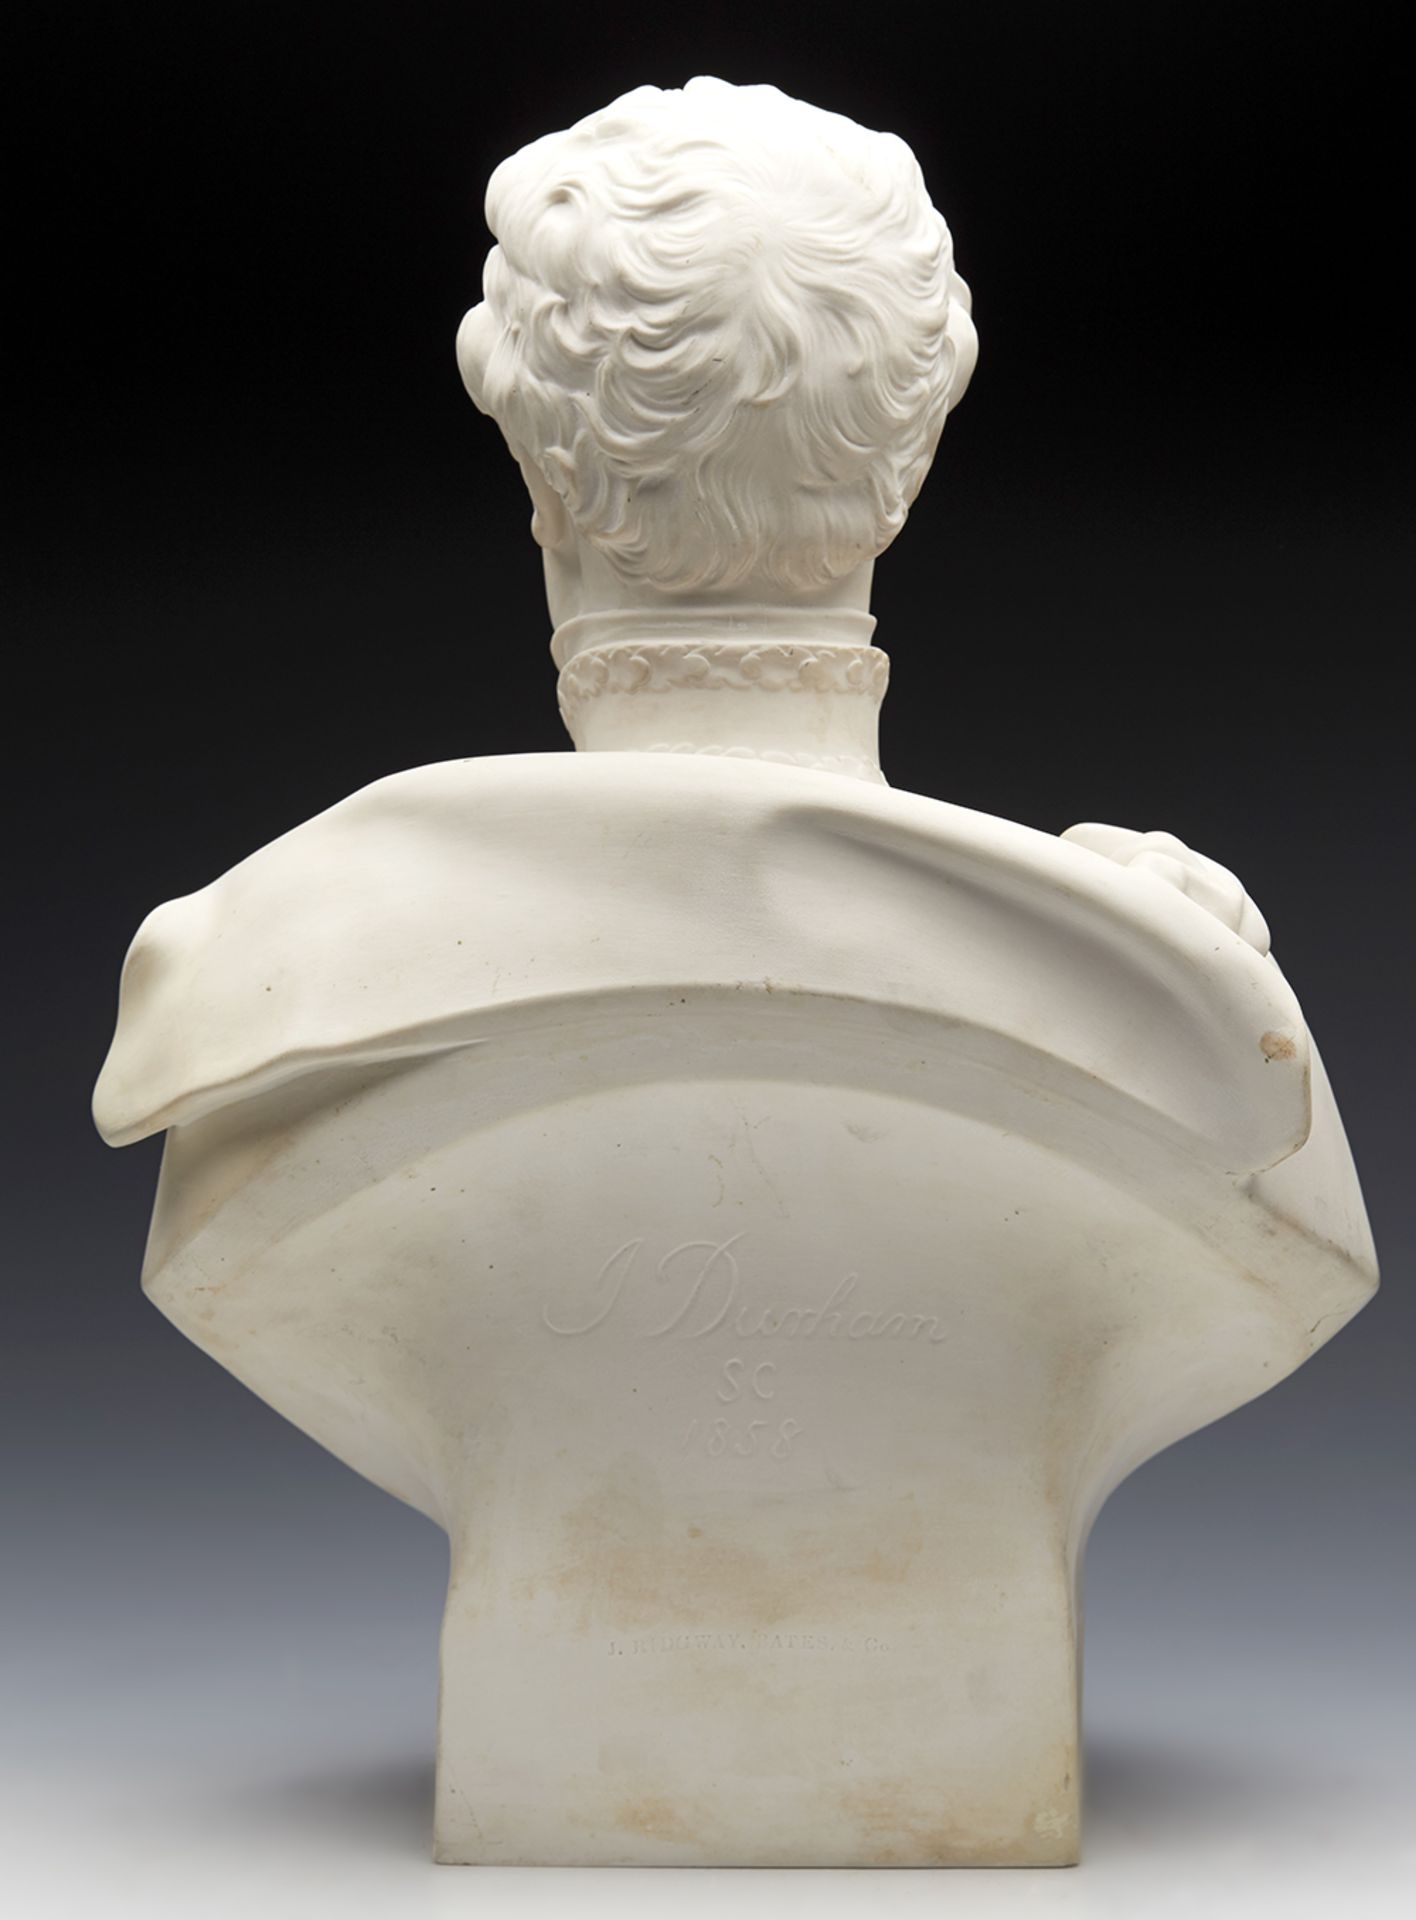 ANTIQUE RIDGWAY PARIAN BUST OF SIR COLIN CAMPBELL BY J DURHAM 1858 - Image 11 of 12